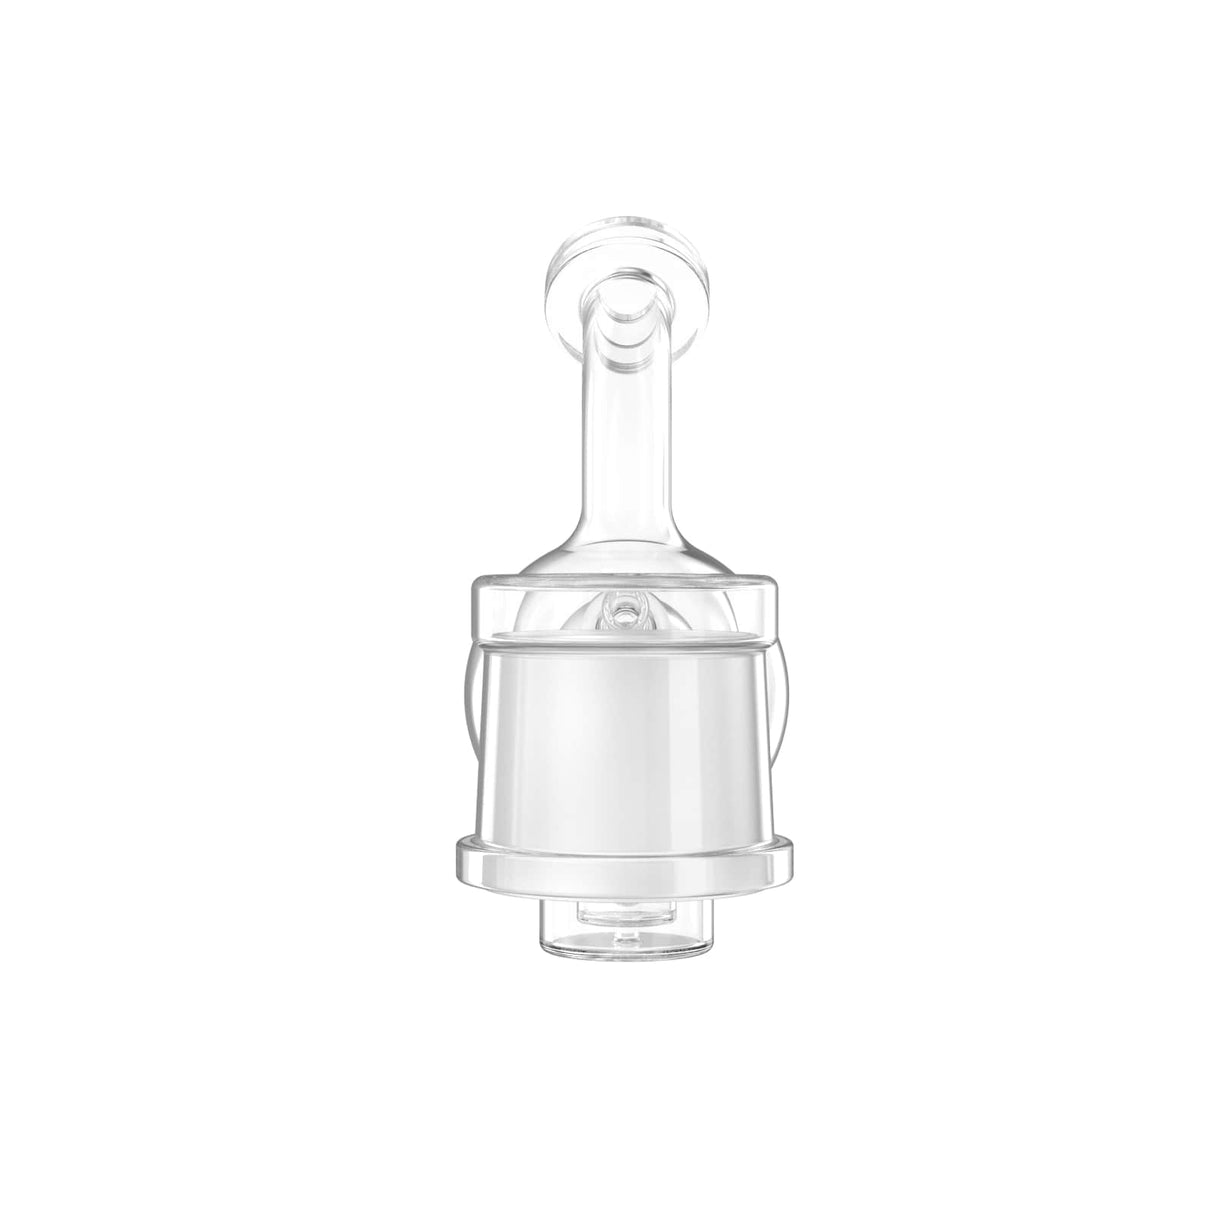 Dr. Dabber Switch Smooth Chug Ball Attachment for Enhanced Vaping